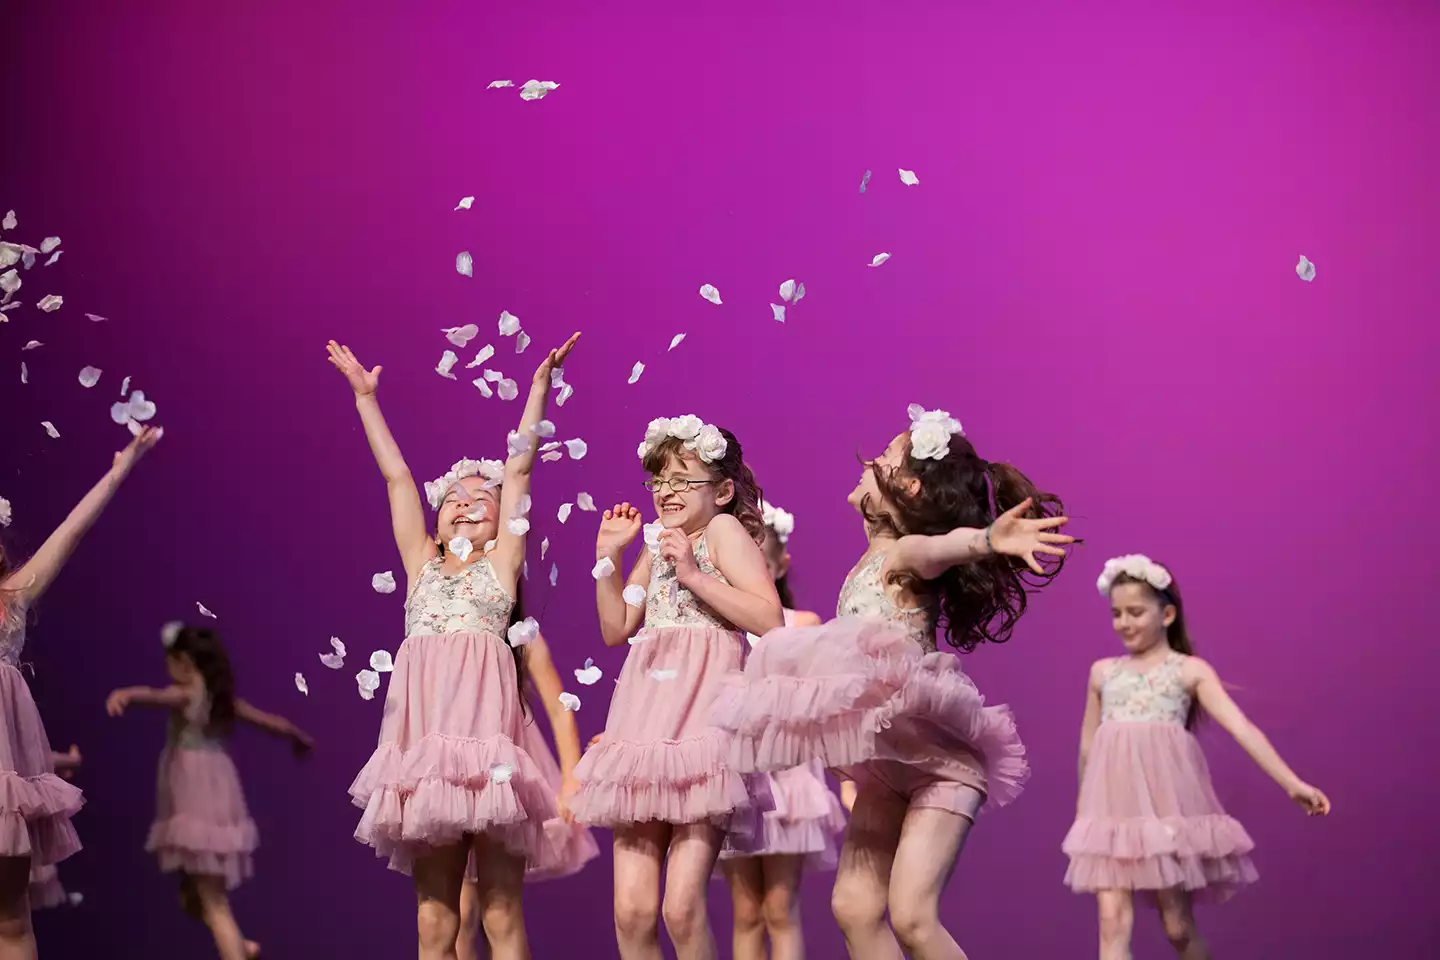 These little lyrical dancers couldn't be sweeter!  The joy evident in their expressions says everything about what recitals means to our DDF dancers.